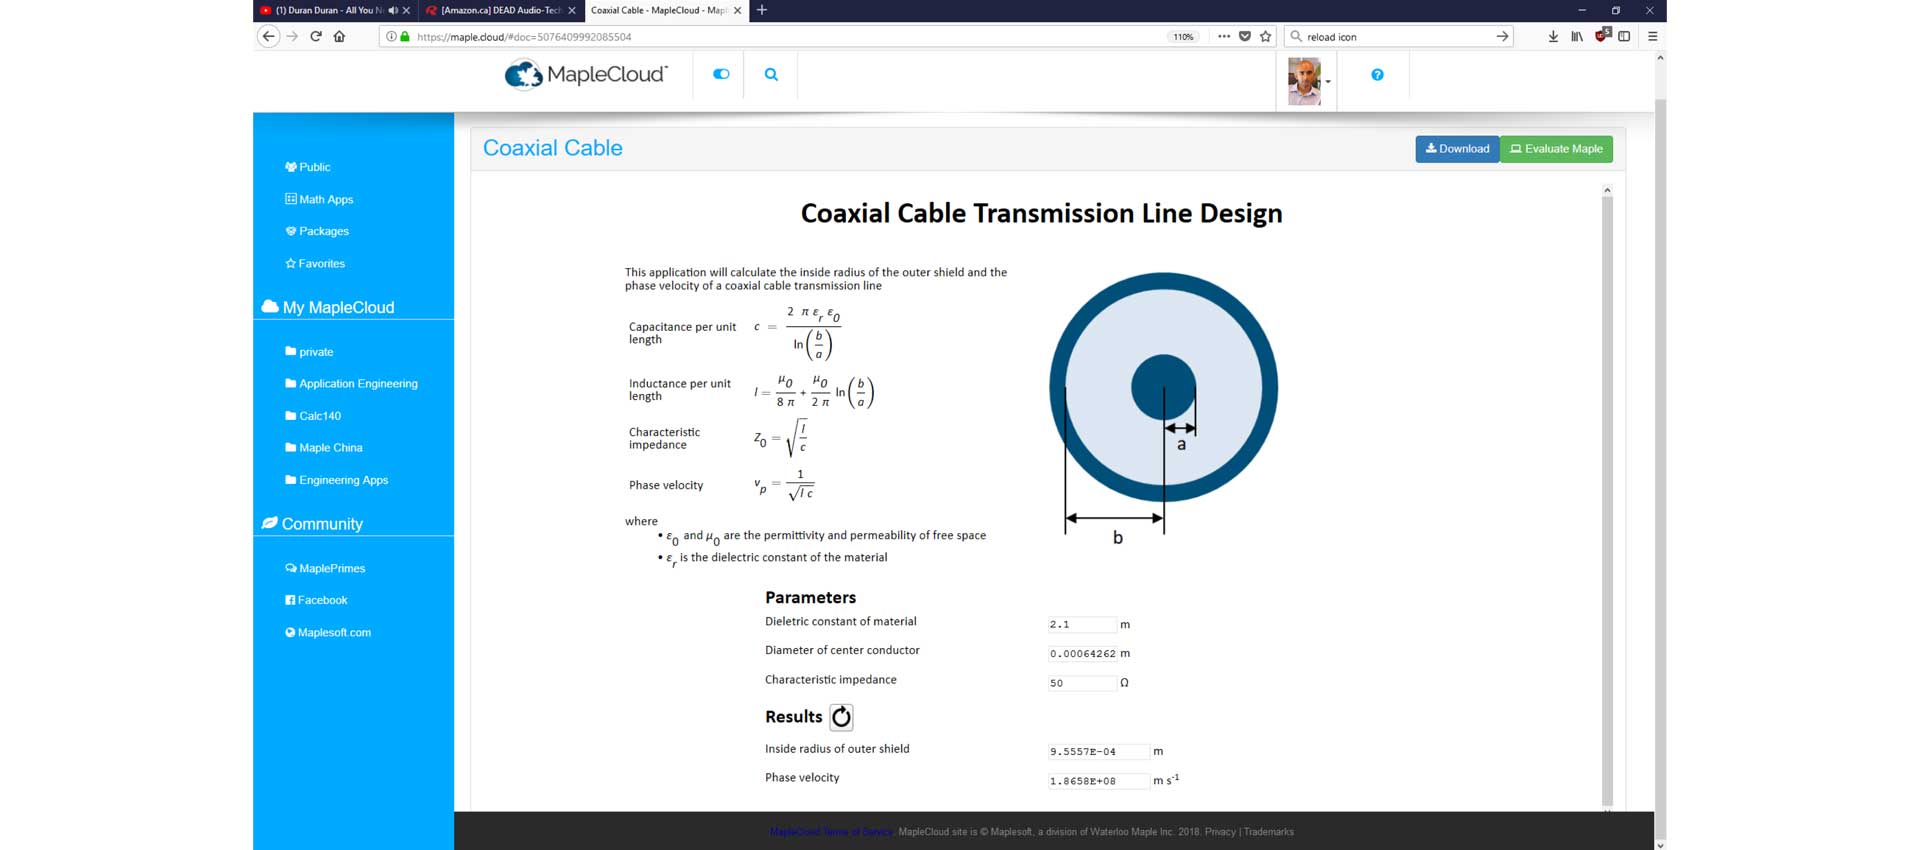 Web-Based coaxial cable transmission line design